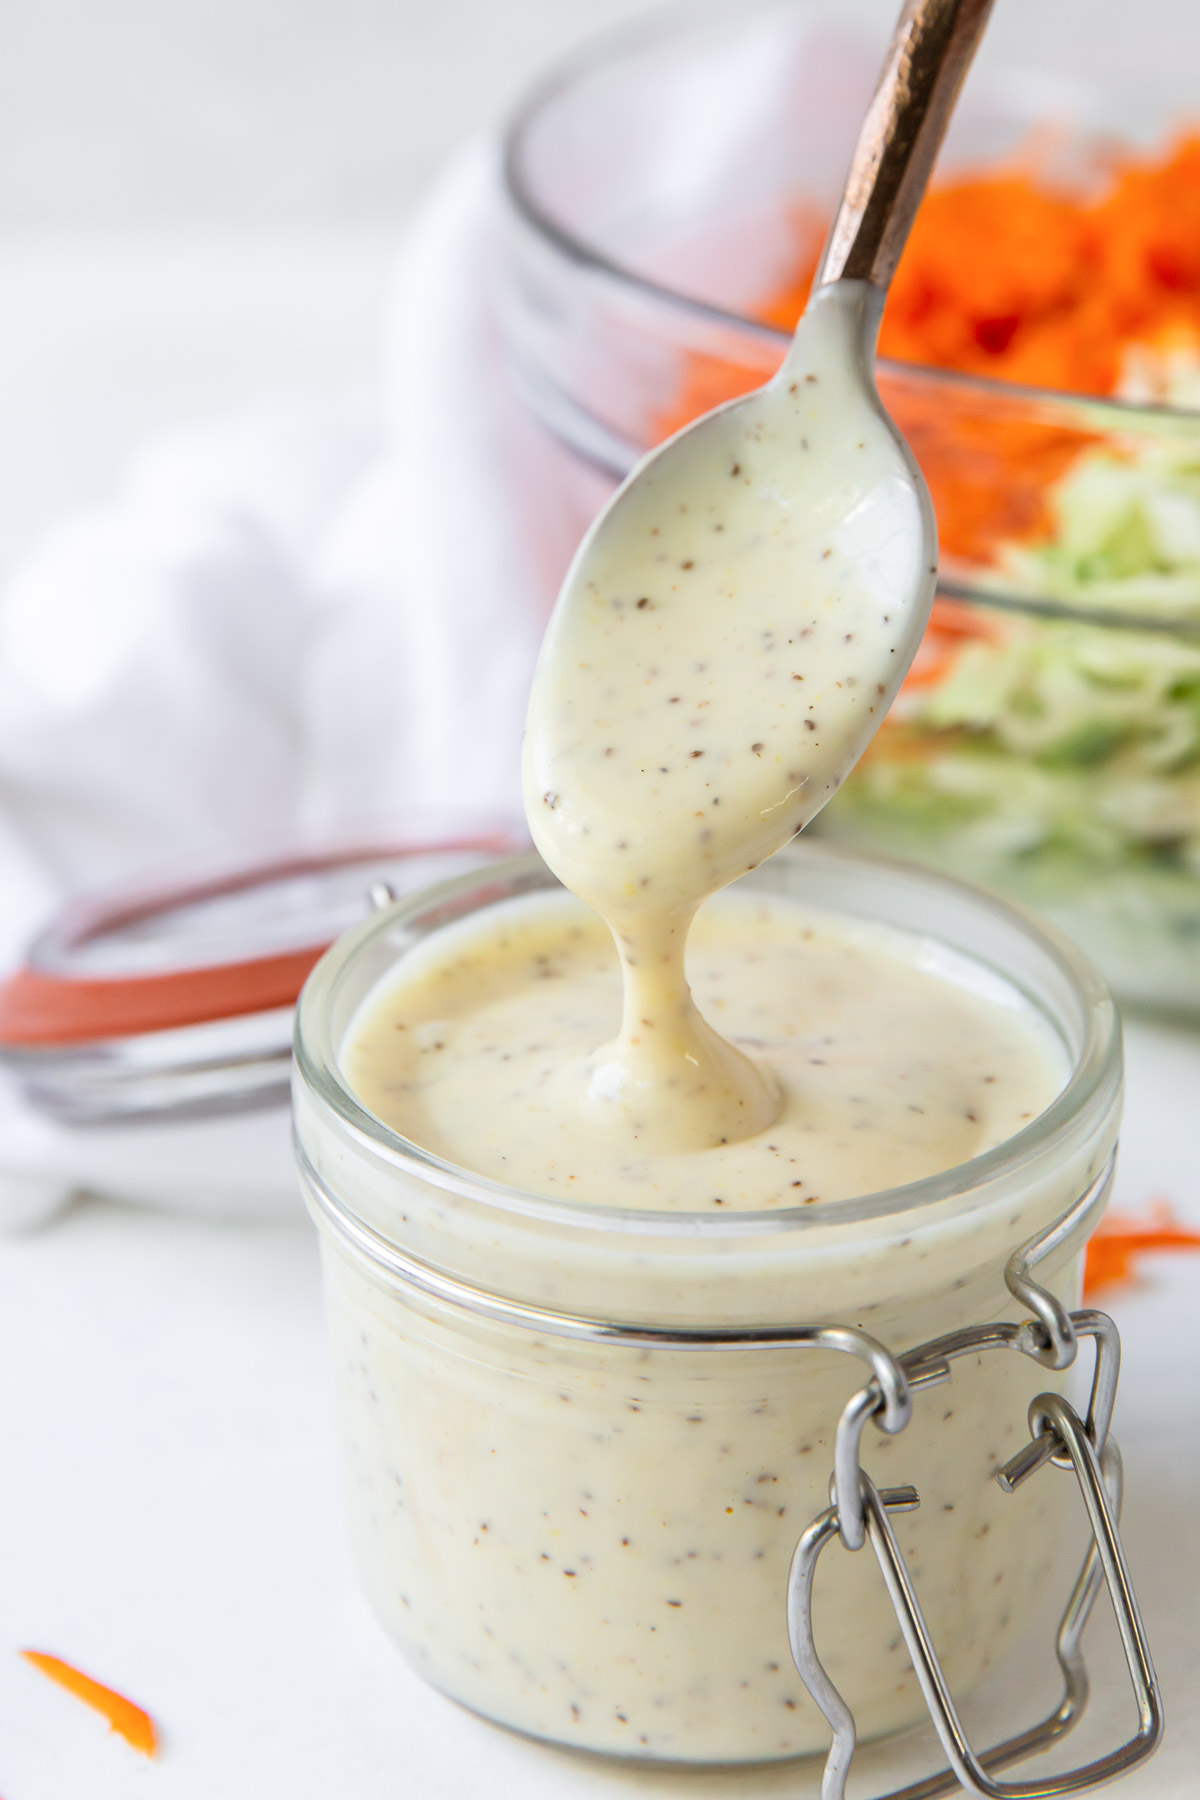 Coleslaw dressing dripping off of a spoon into a jar of dressing.